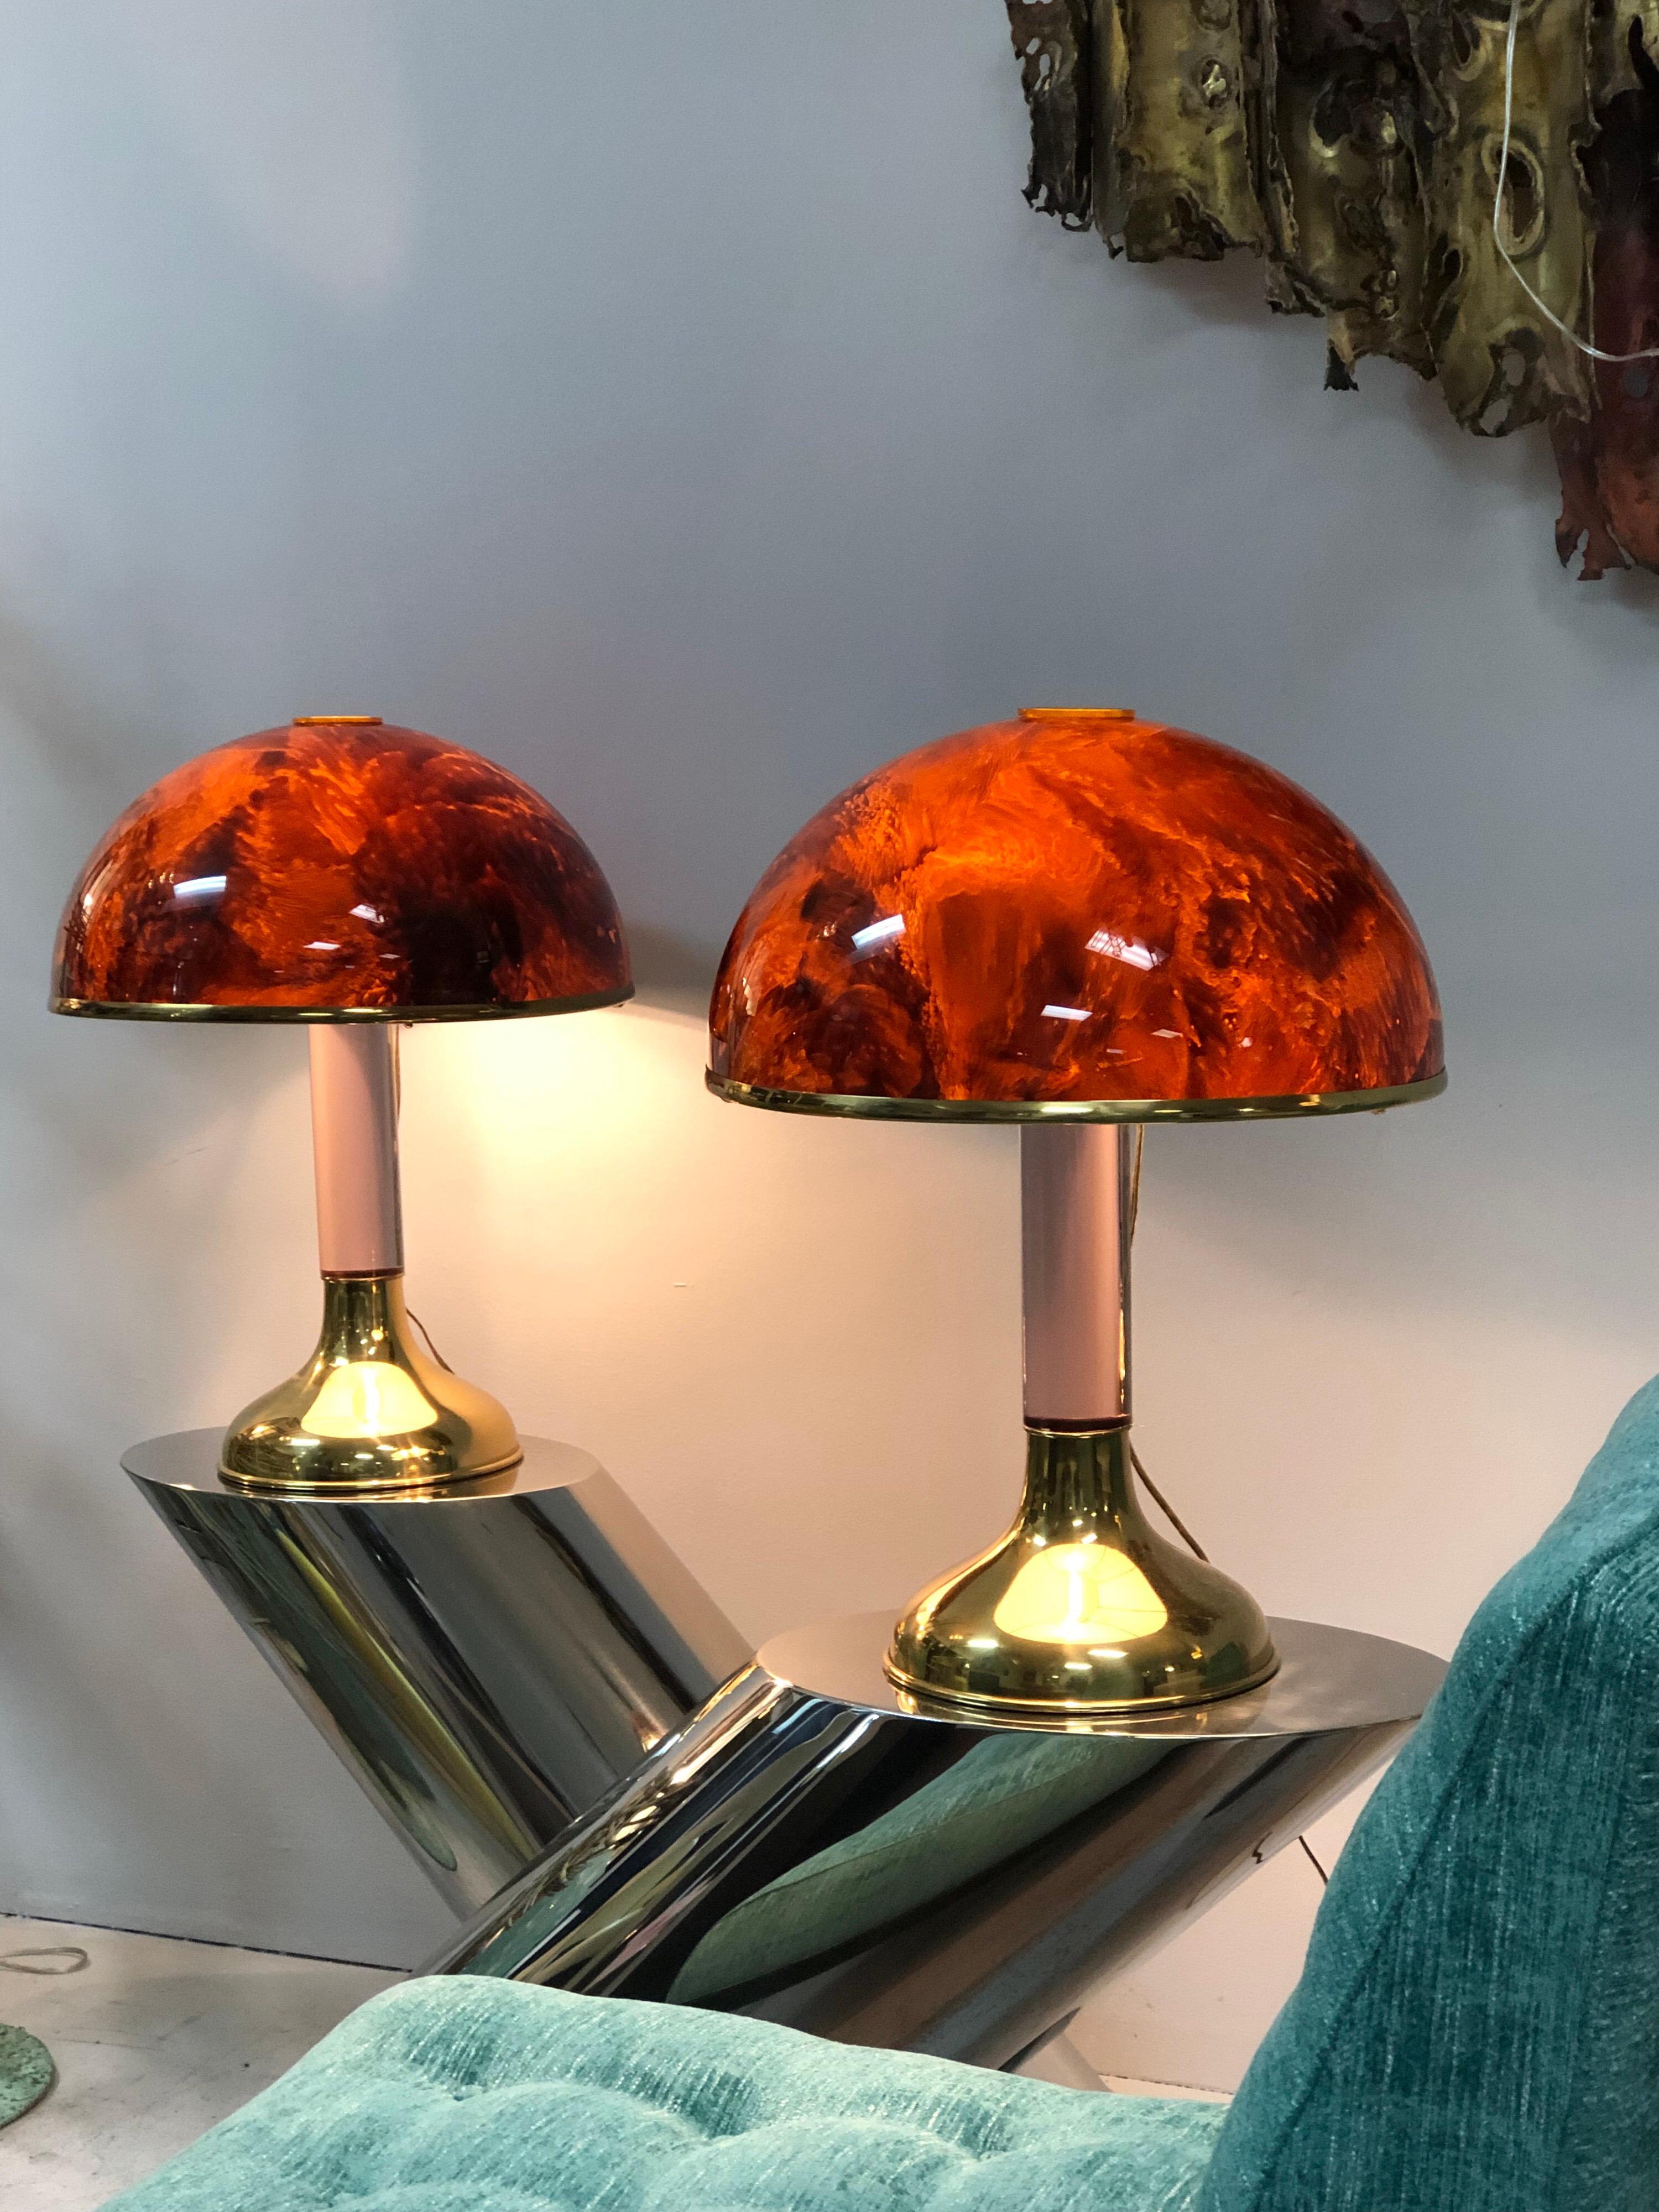 A pair of exquisite table lamps. Brass base with clear Lucite shaft and an acrylic dome shade done in faux tortoise design with brass trim. The look like pieces of jewelry in a room.